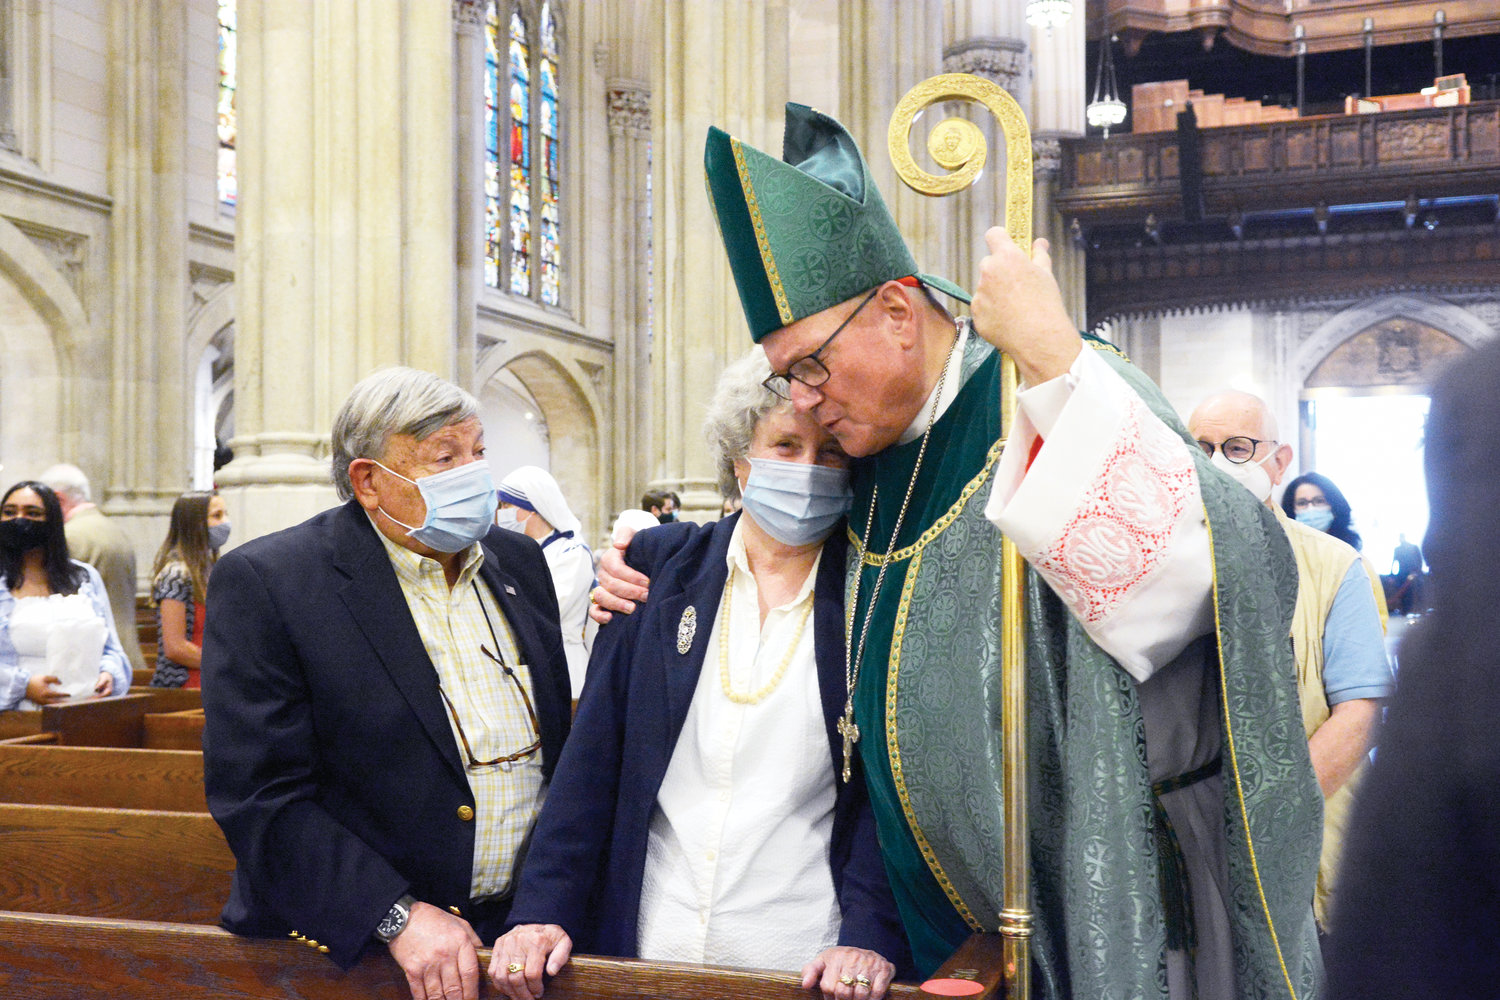 Cardinal Dolan consoles Patricia Adams, whose 47-year-old son Frank Robert Mattoni died in a motorcycle accident seven years ago. Her husband, Gerald Adams, left, accompanied her to the Special Mass for Deceased Children of Parents from the Archdiocese of New York the cardinal celebrated at St. Patrick’s Cathedral.